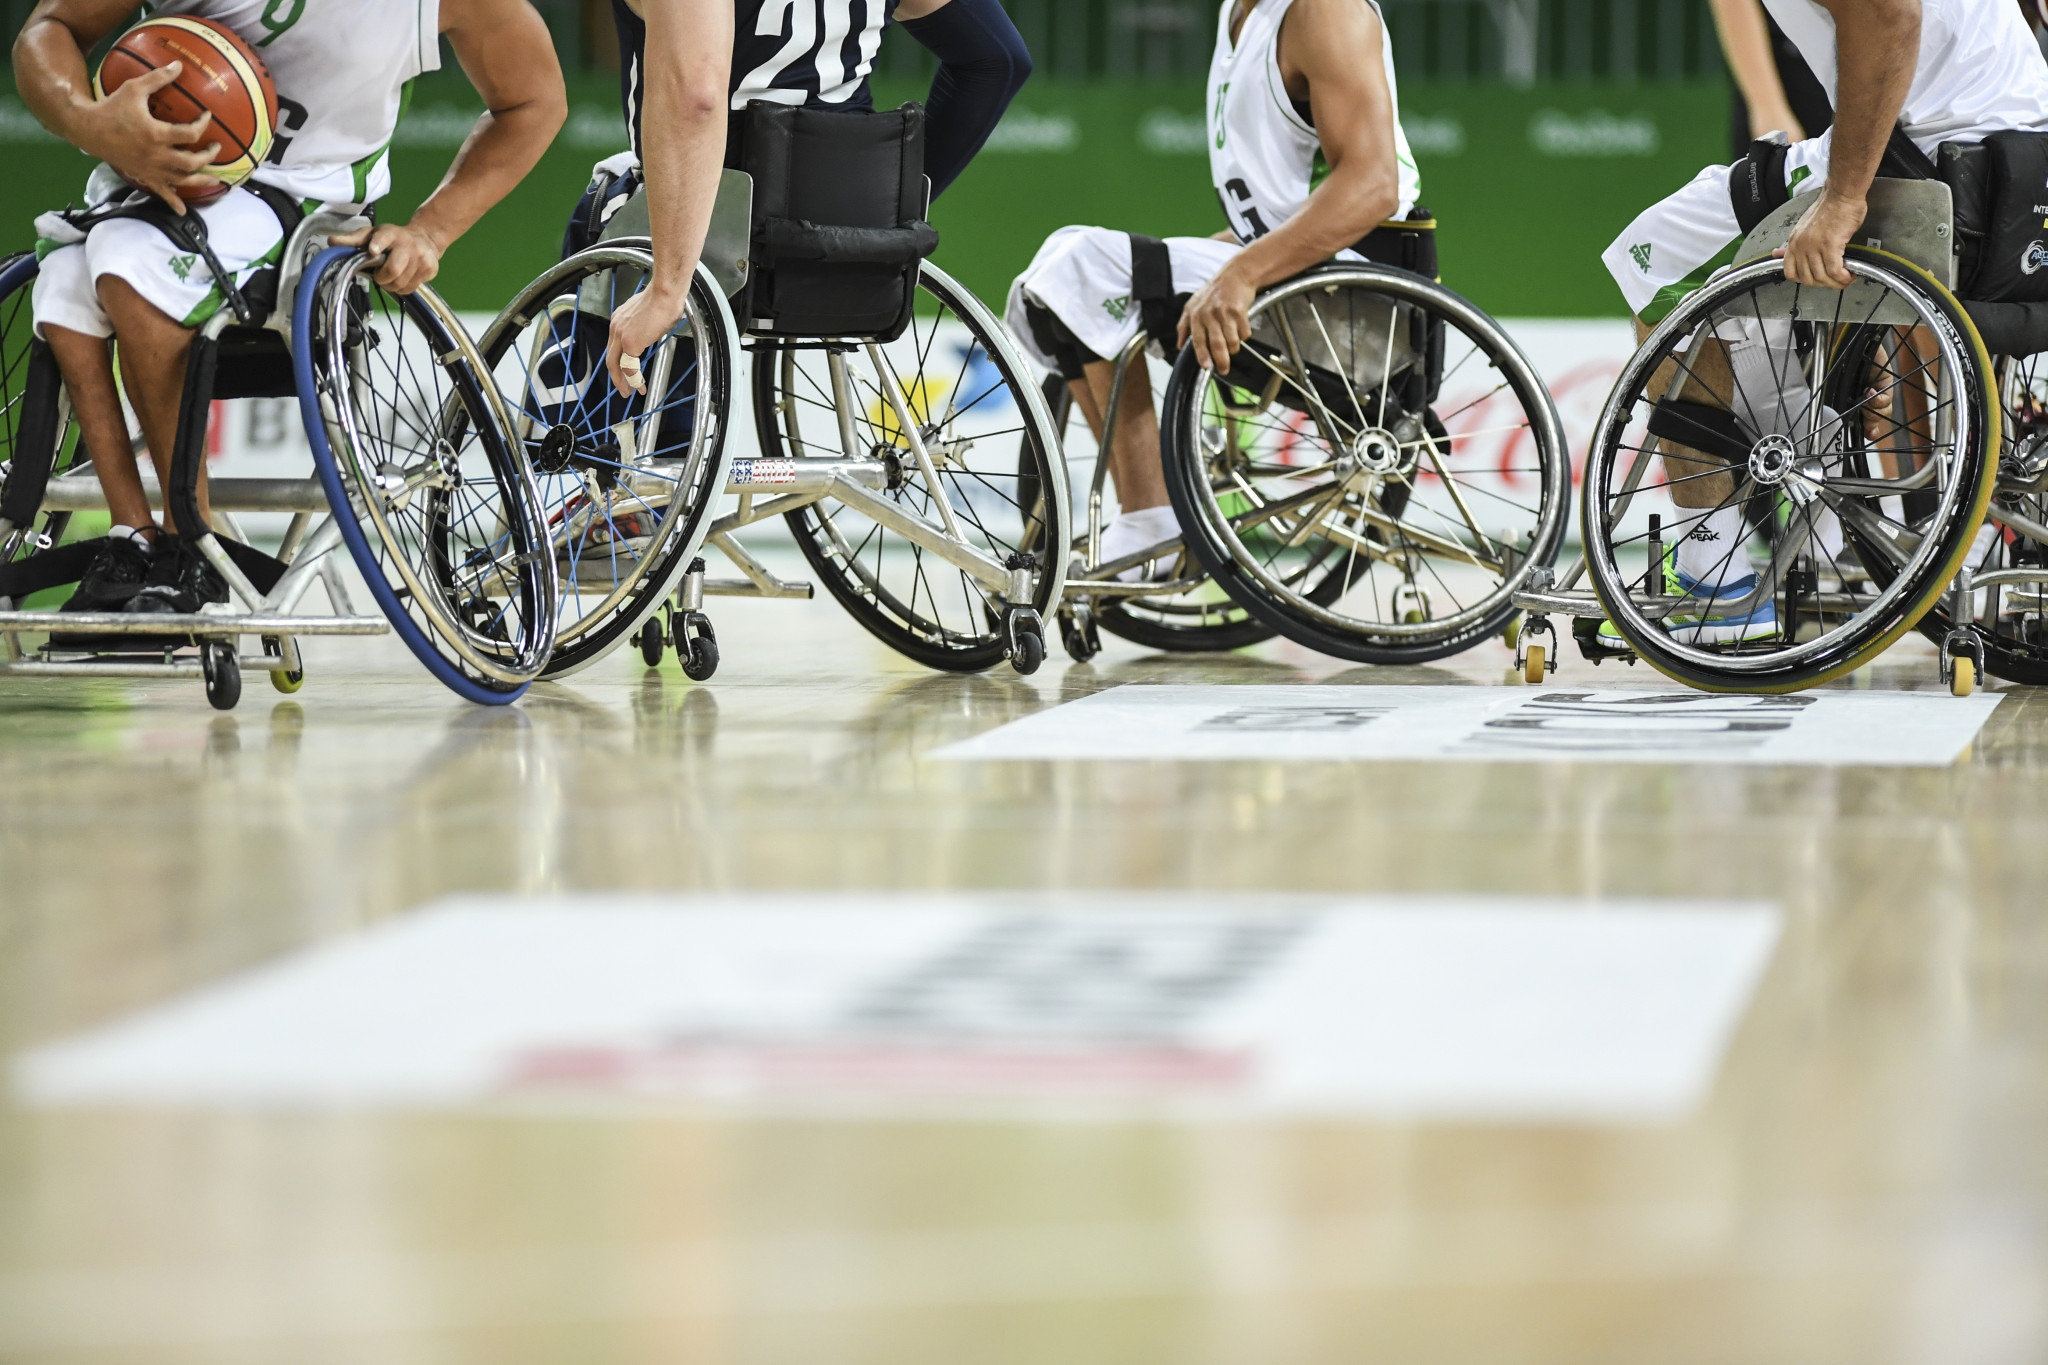 IWBF finds one player ineligible during second phase of classification reassessment process